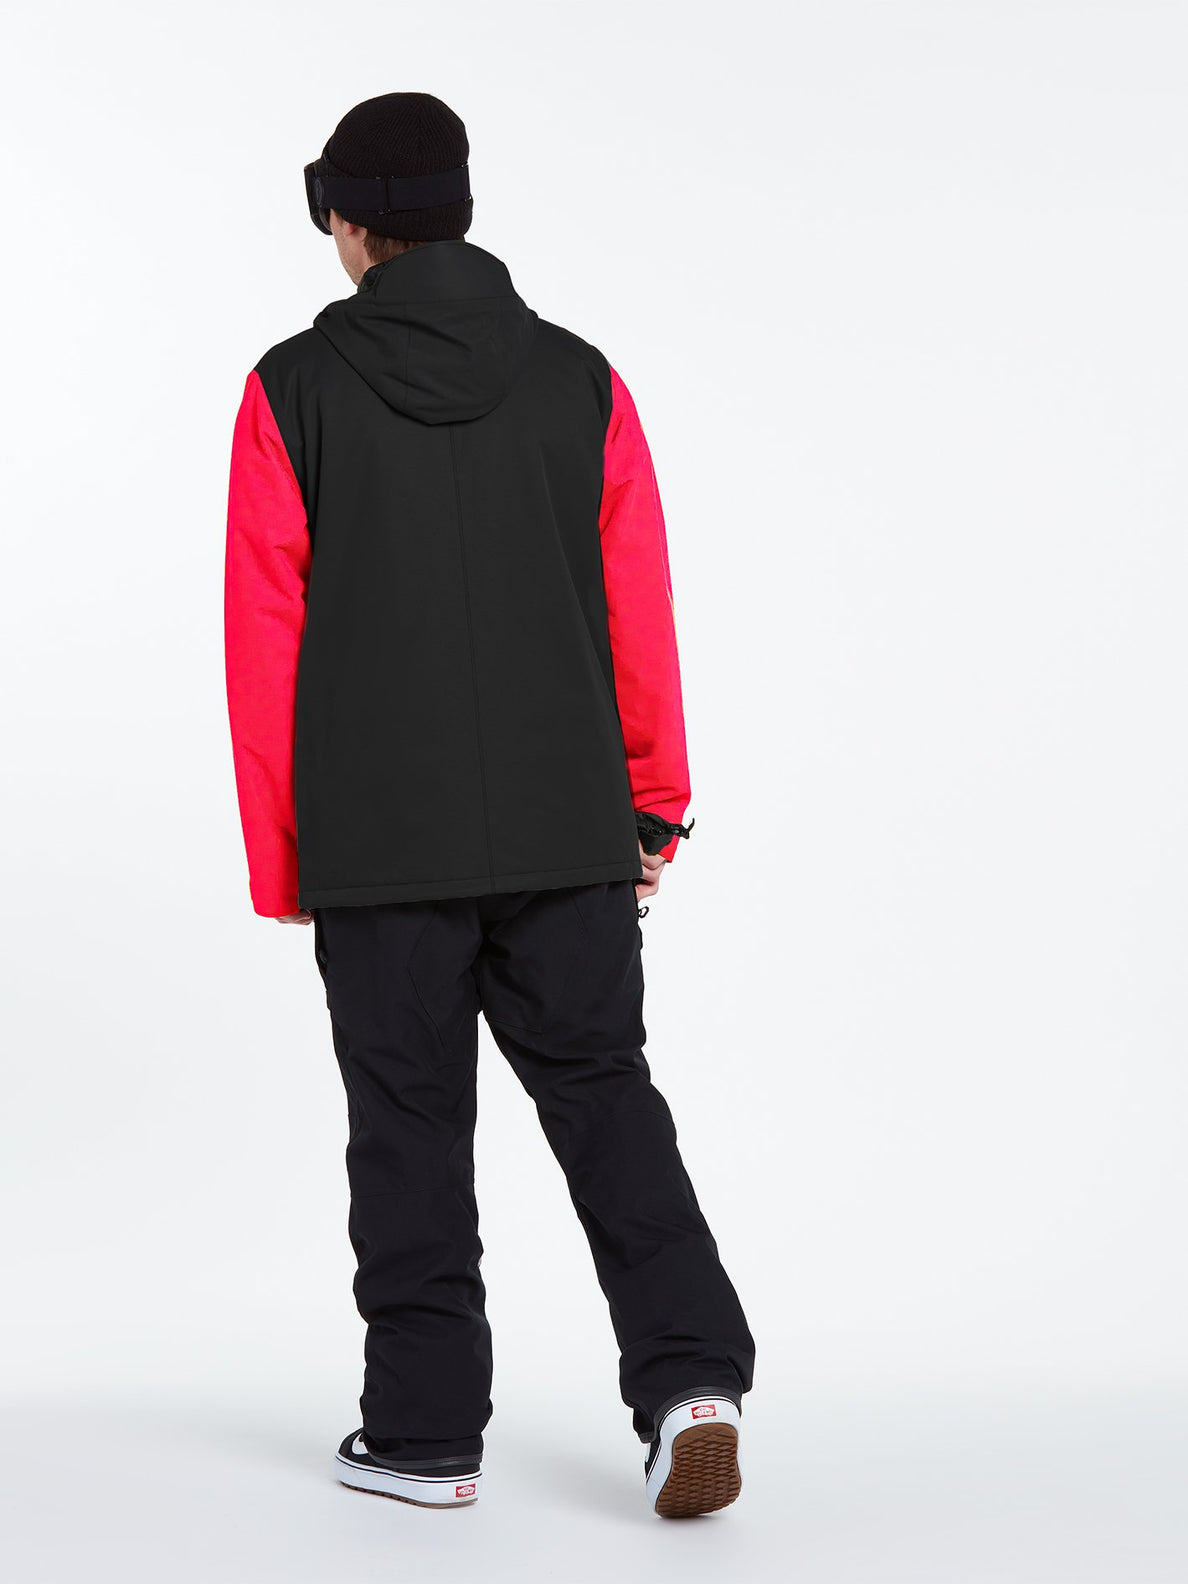 17Forty Insulated Jacket - RED COMBO (G0452114_RDC) [5]